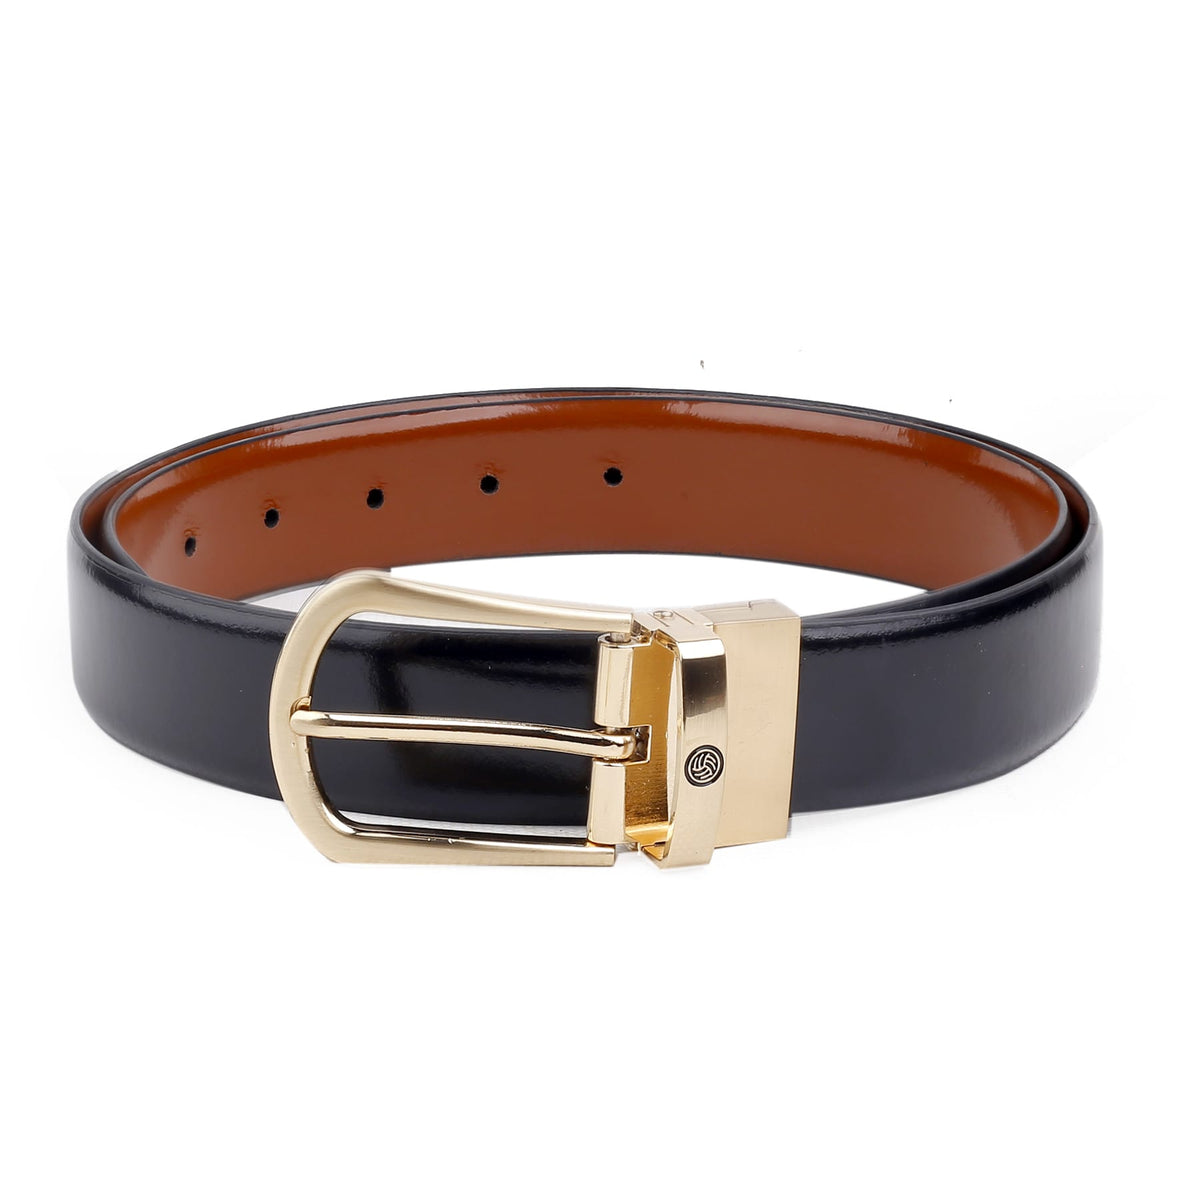 Bacca Bucci Reversible Leather Formal Dress Belts with a Stylish Finish and Nickel-Free Buckle